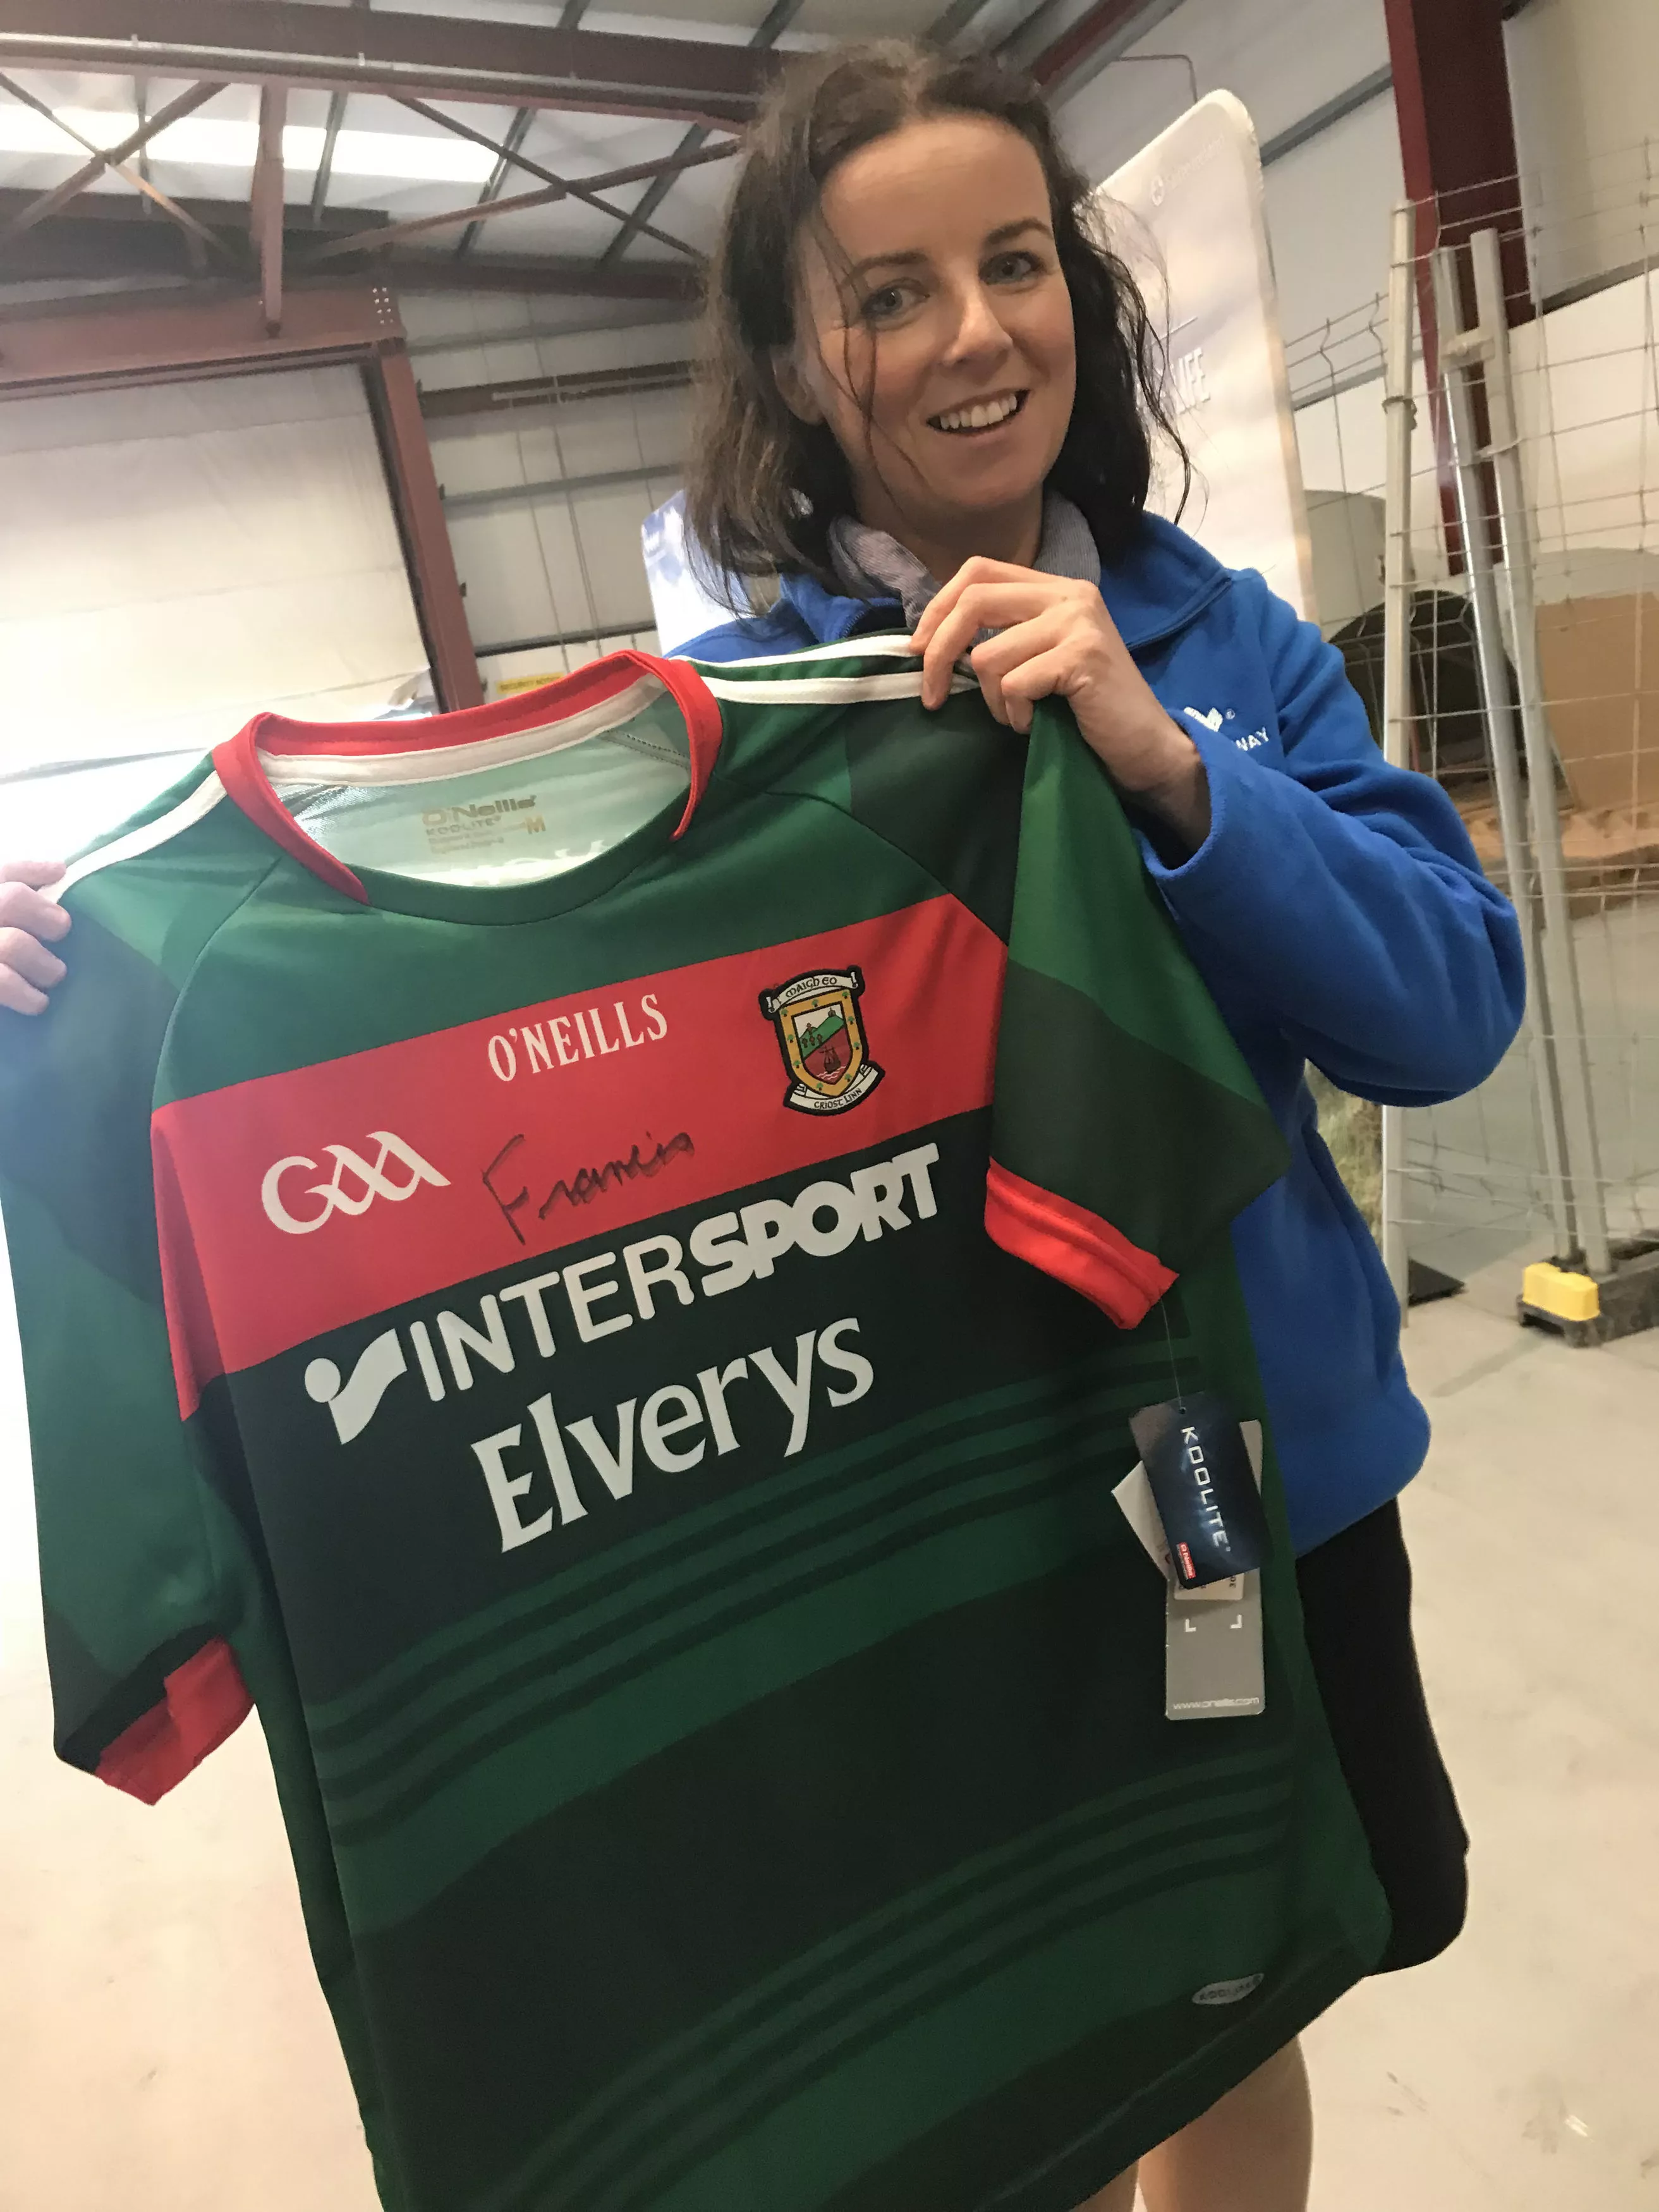 Pope Francis signs Mayo jersey before leaving Knock; will this break the curse?